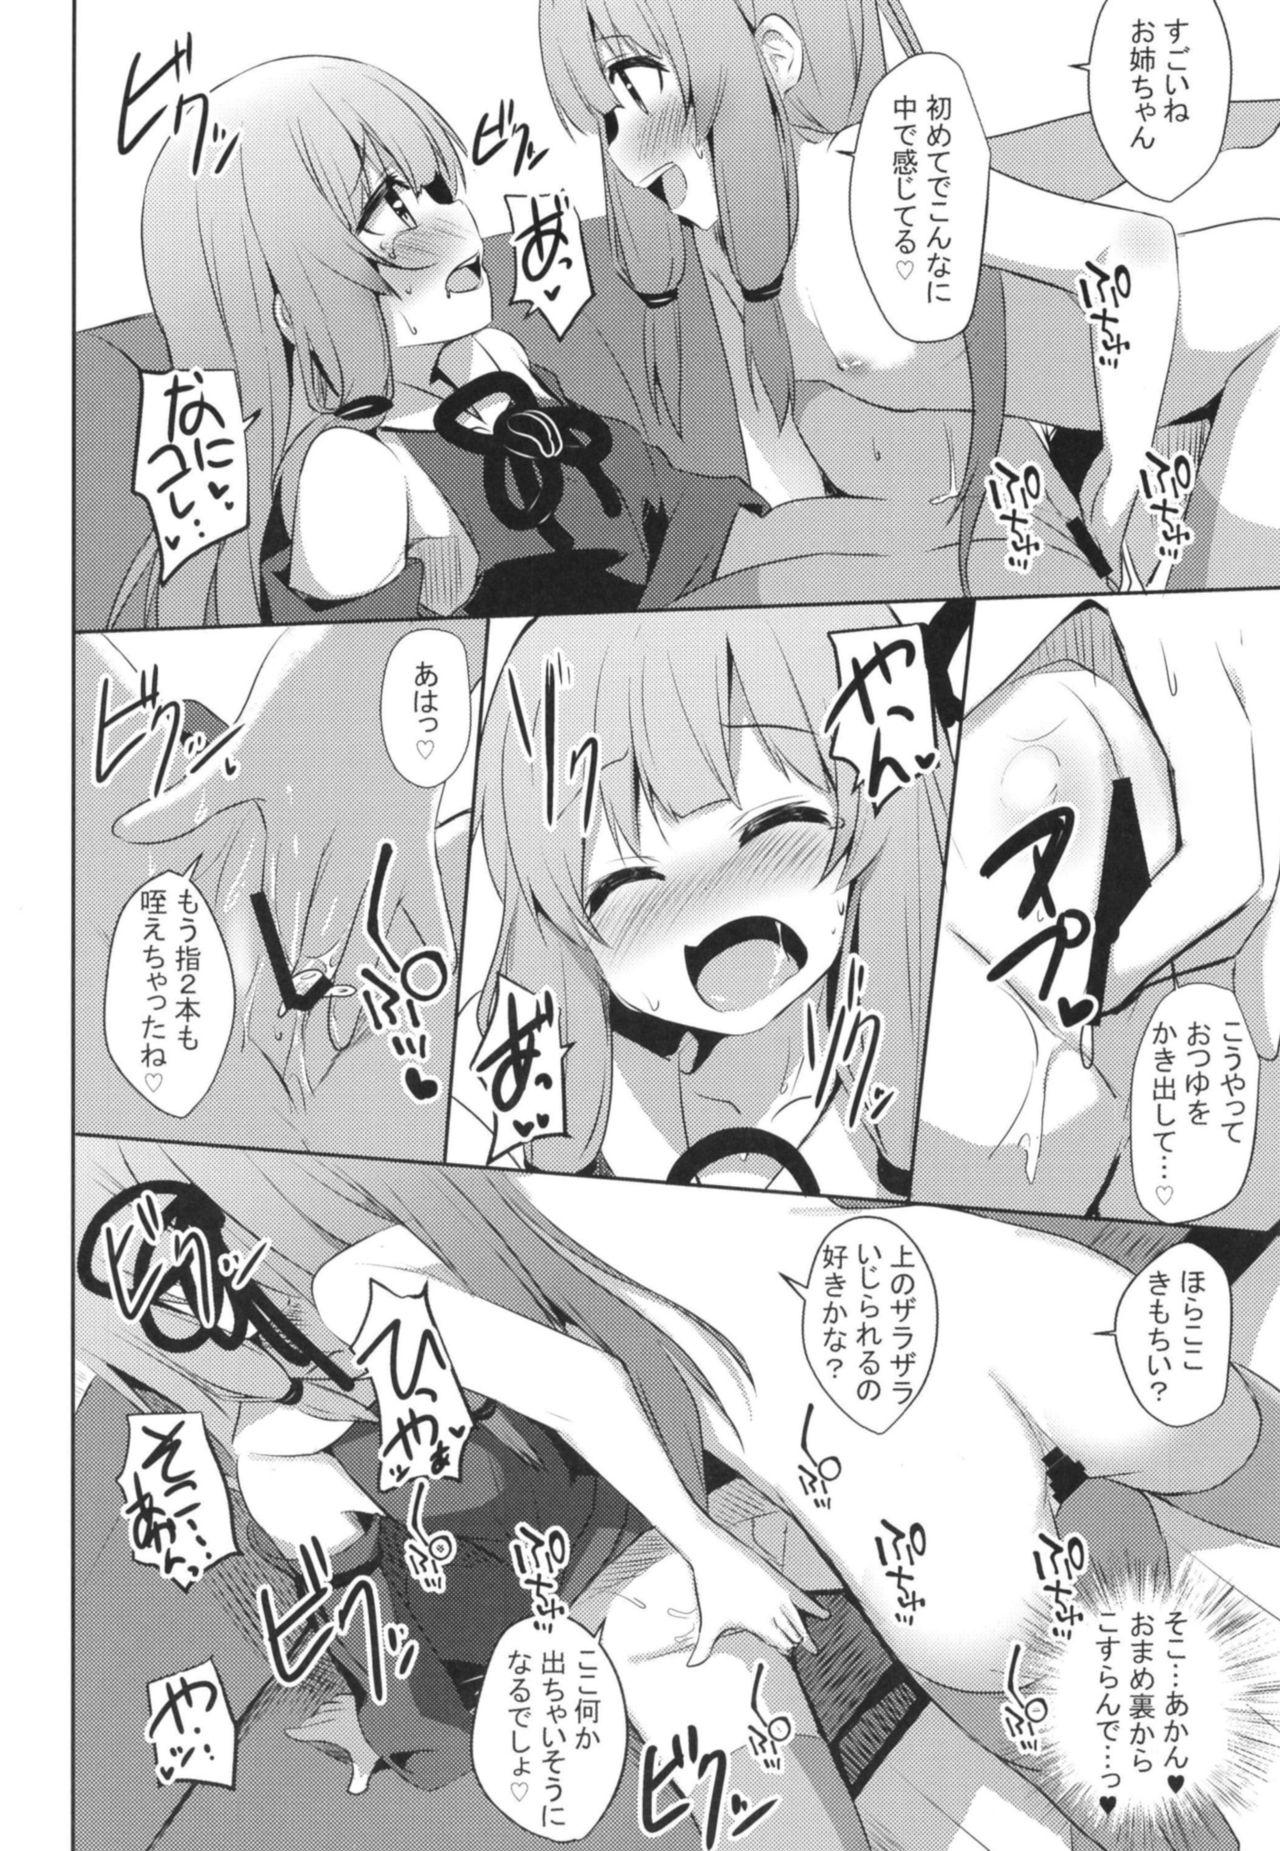 Shaved Pussy [Milk Pudding (Jamcy)] Akane-chan Challenge! 4-kaime (VOICEROID) [Digital] - Voiceroid Neighbor - Page 7